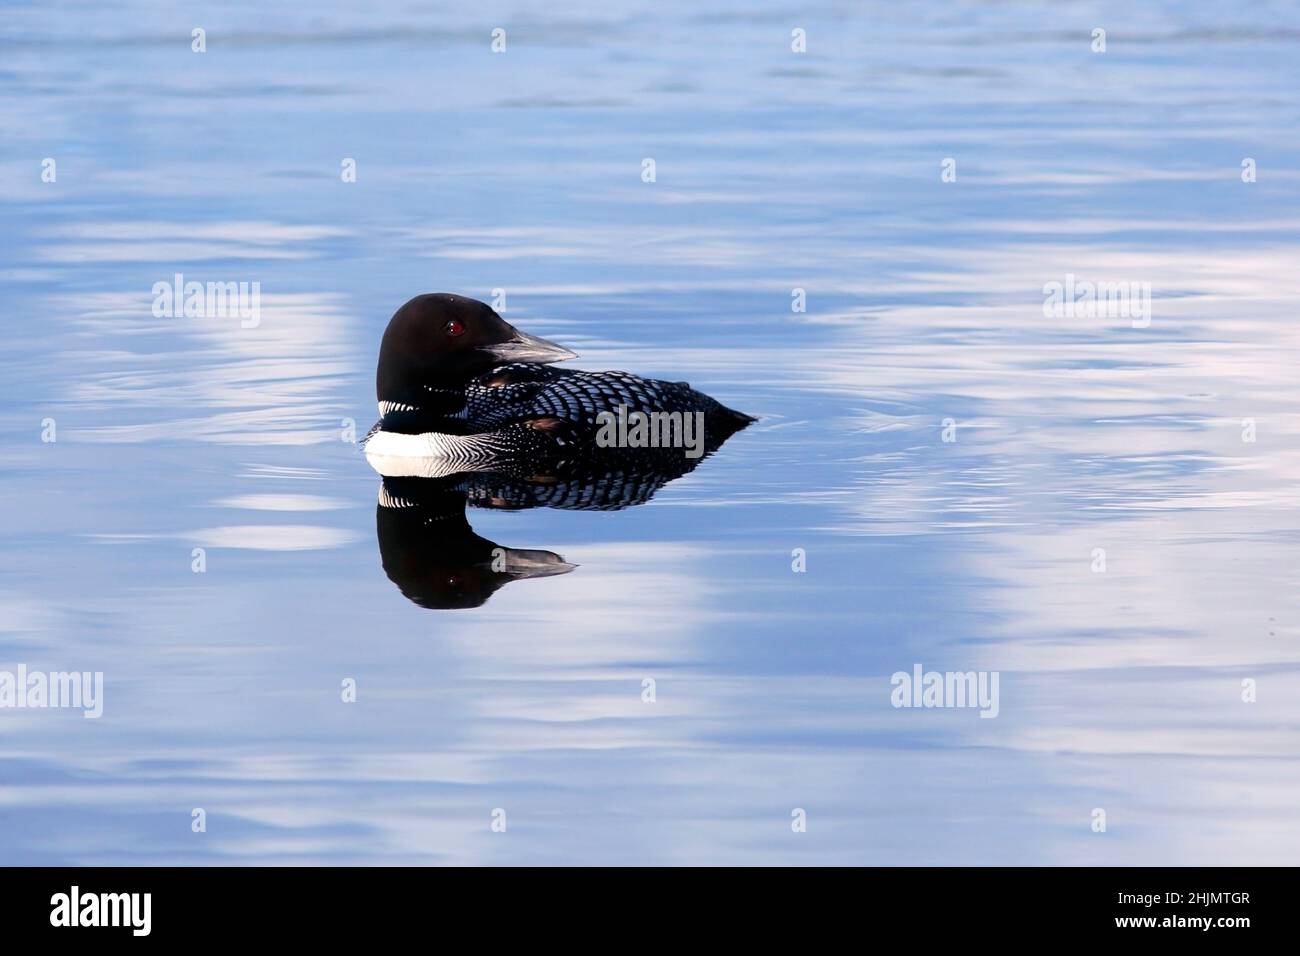 Common Loon floating on calm blue lake, reflection on  water. Stock Photo